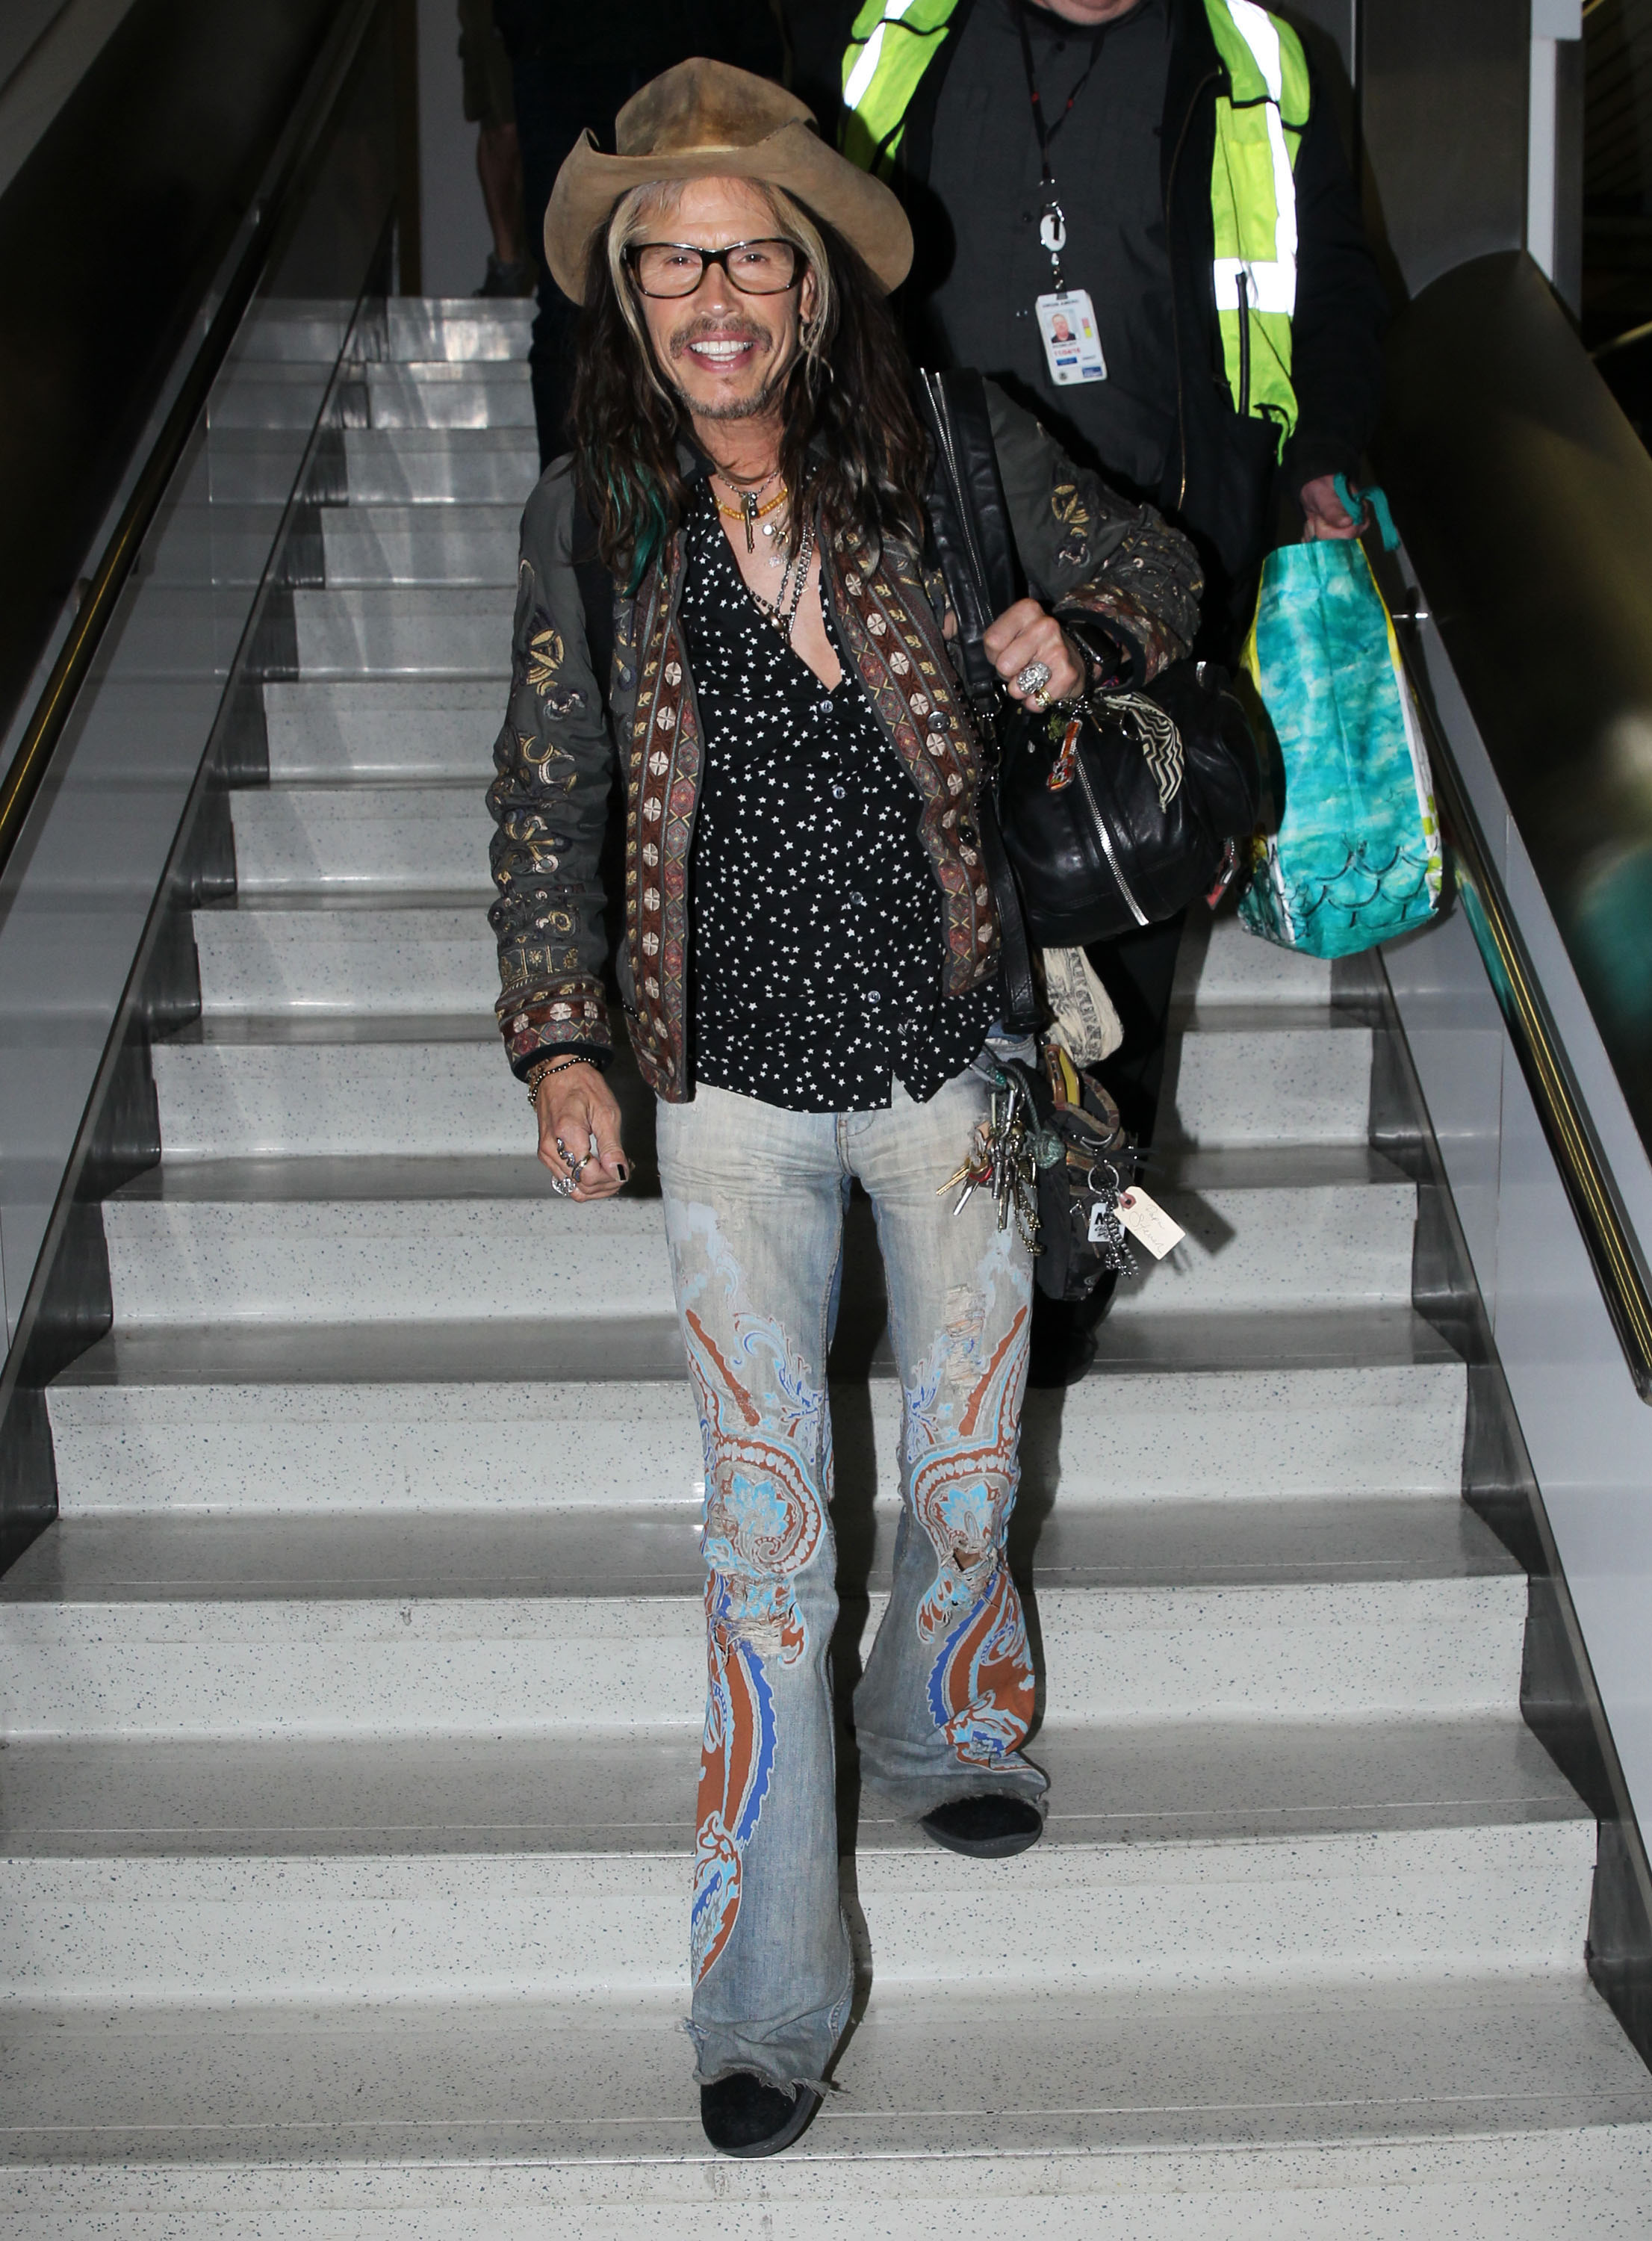 I Don’t Want to Miss a Fug: Steven Tyler